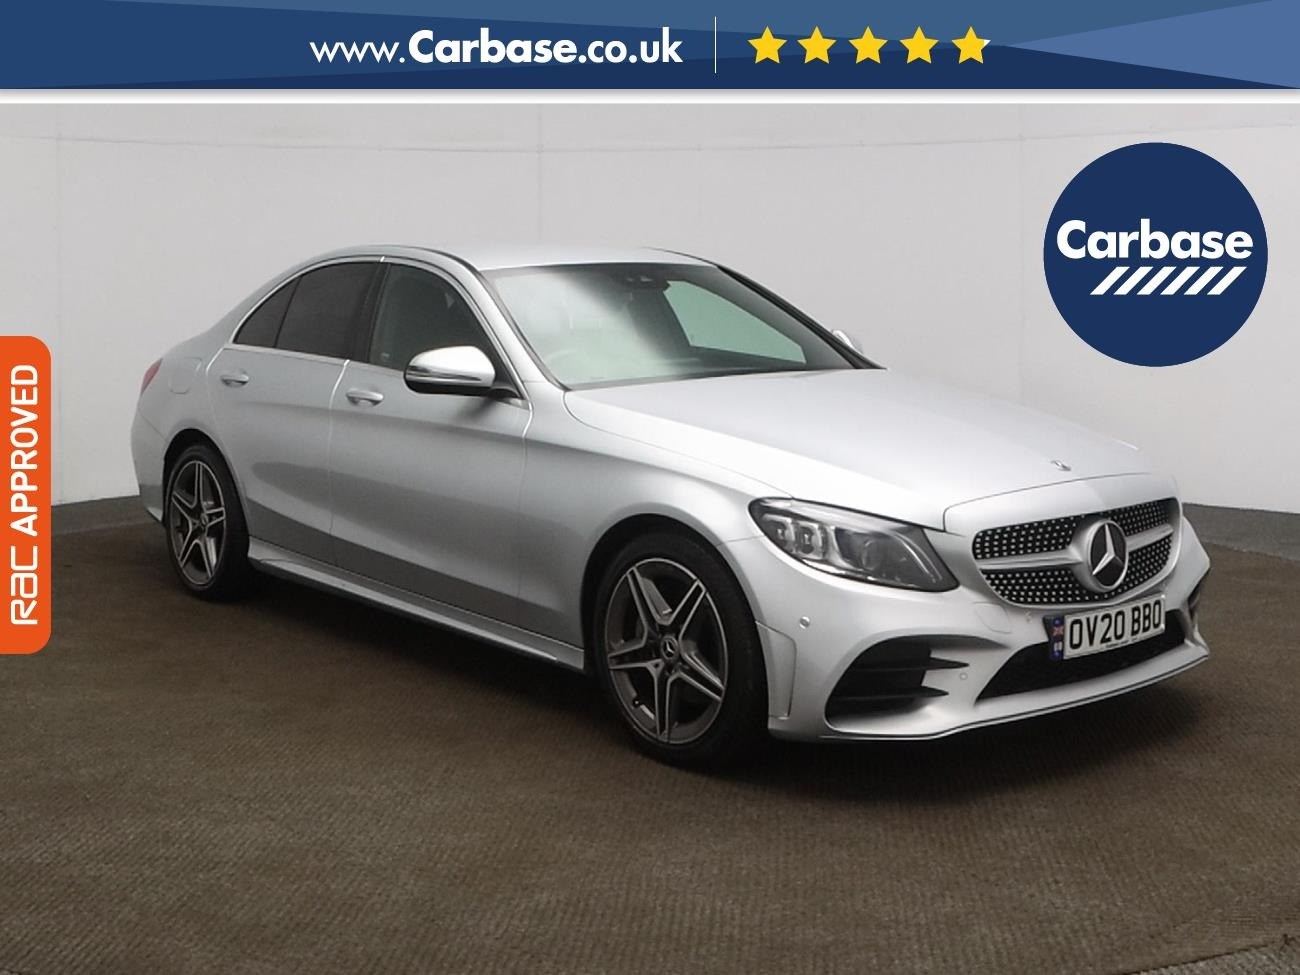 2020 used Mercedes-Benz C Class C220d AMG Line 4dr 9G-Tronic